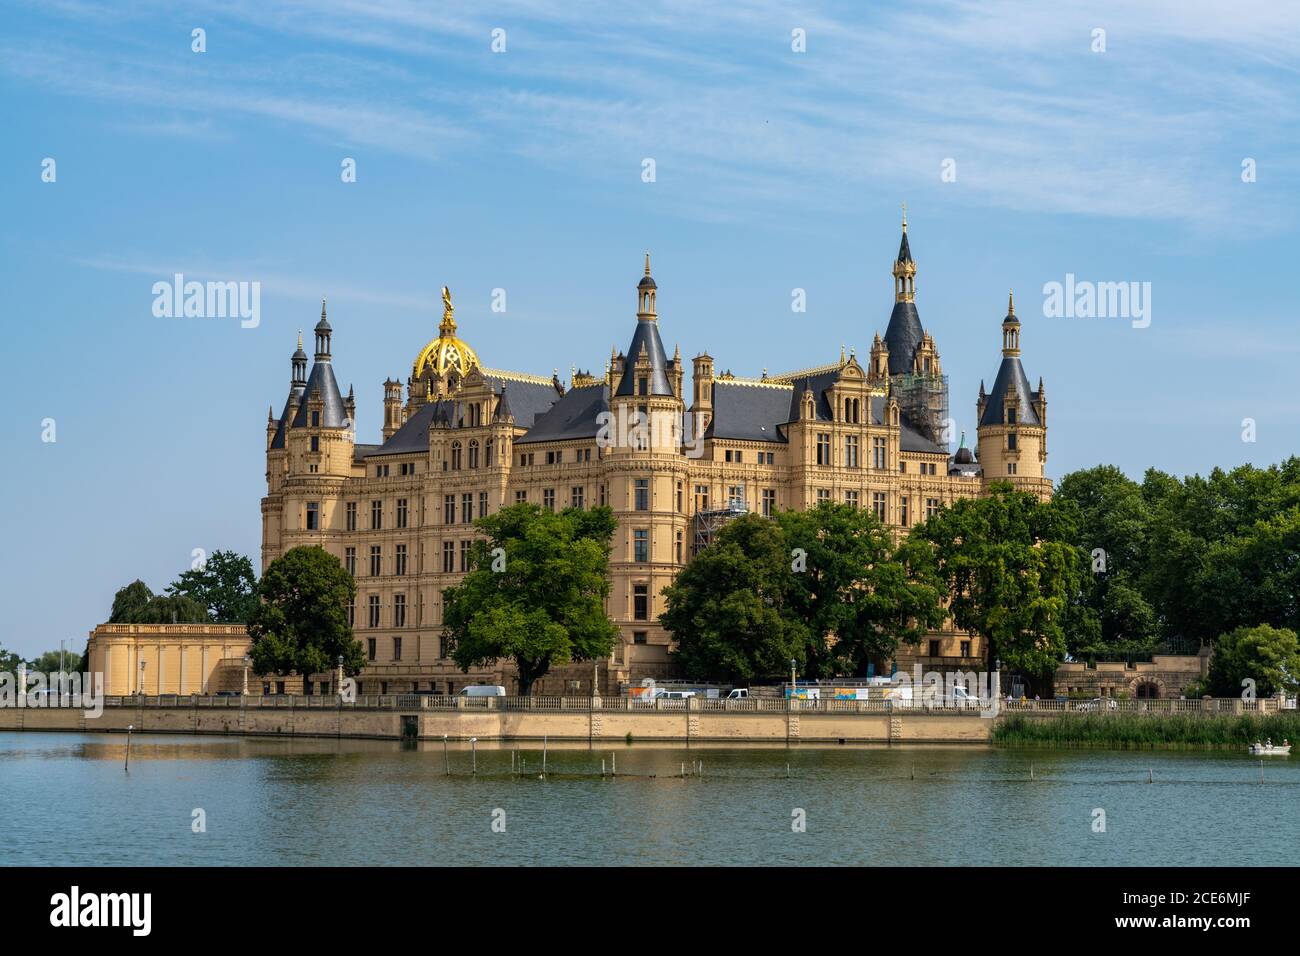 A view of the Schwerin Castle in Mecklenburg-Vorpommern in Germany Stock Photo